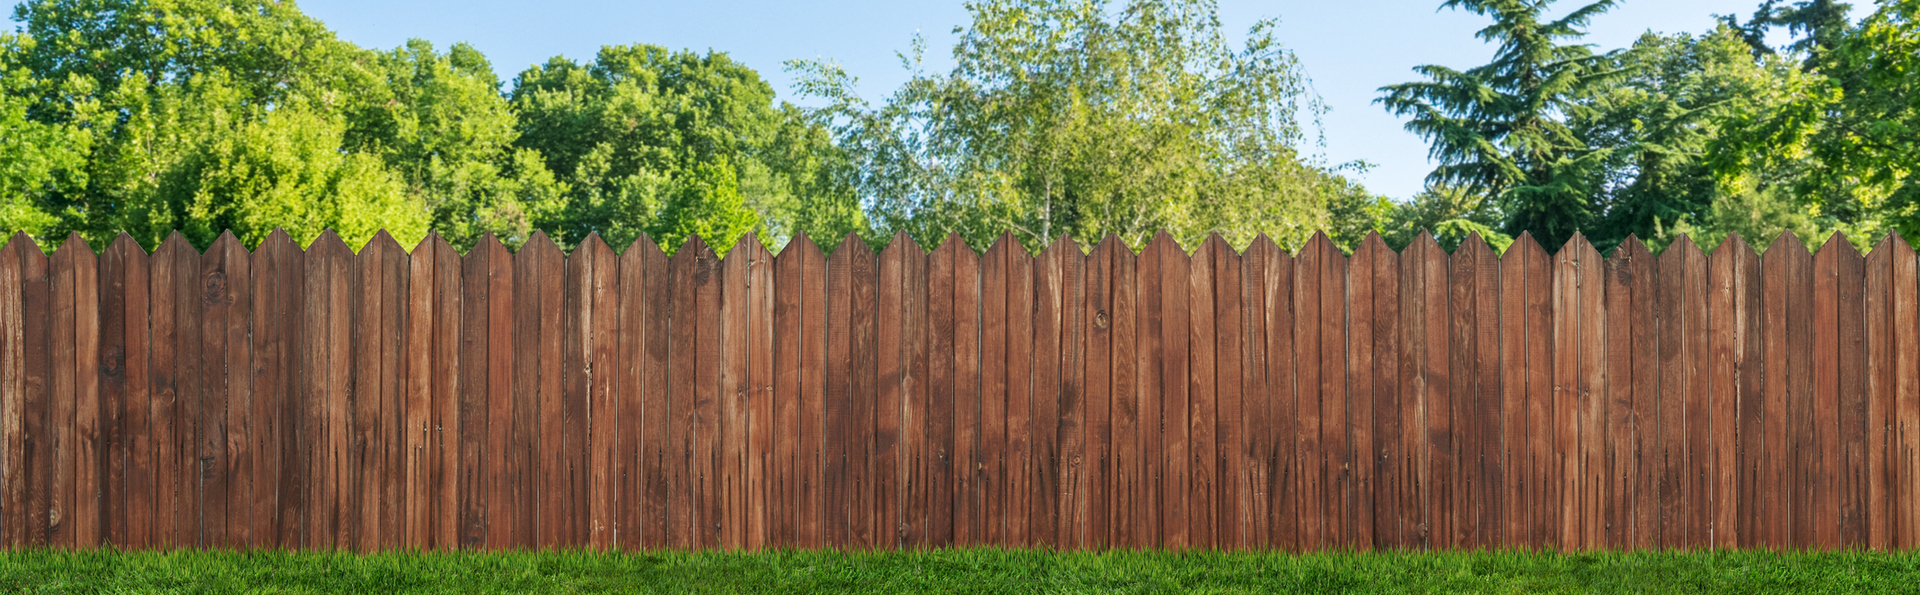 A landscape image of a fence in the garden